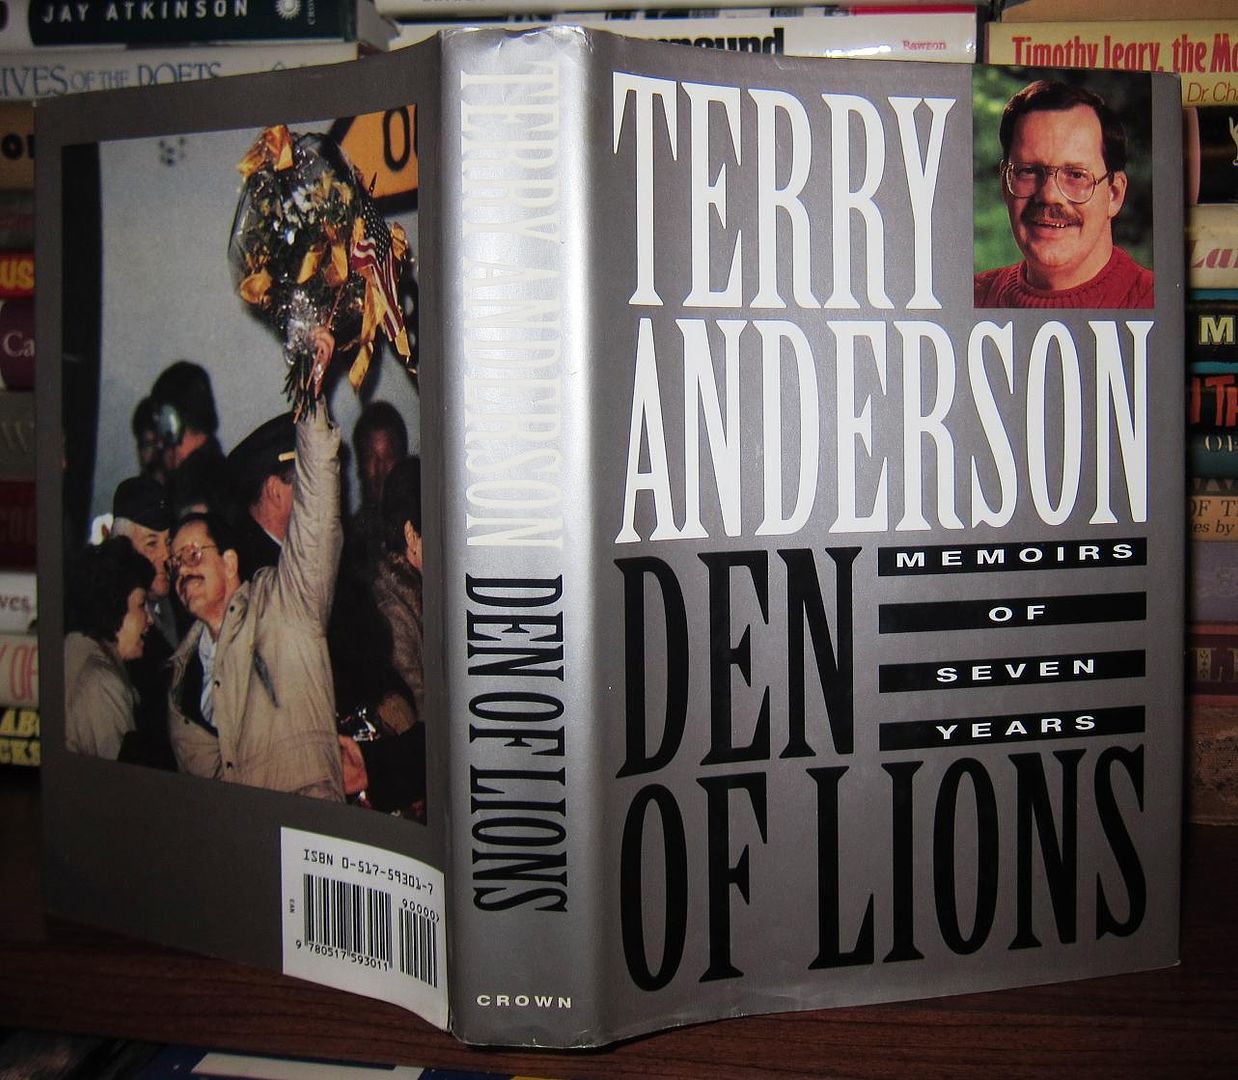 ANDERSON, TERRY - Den of Lions Memoirs of Seven Years